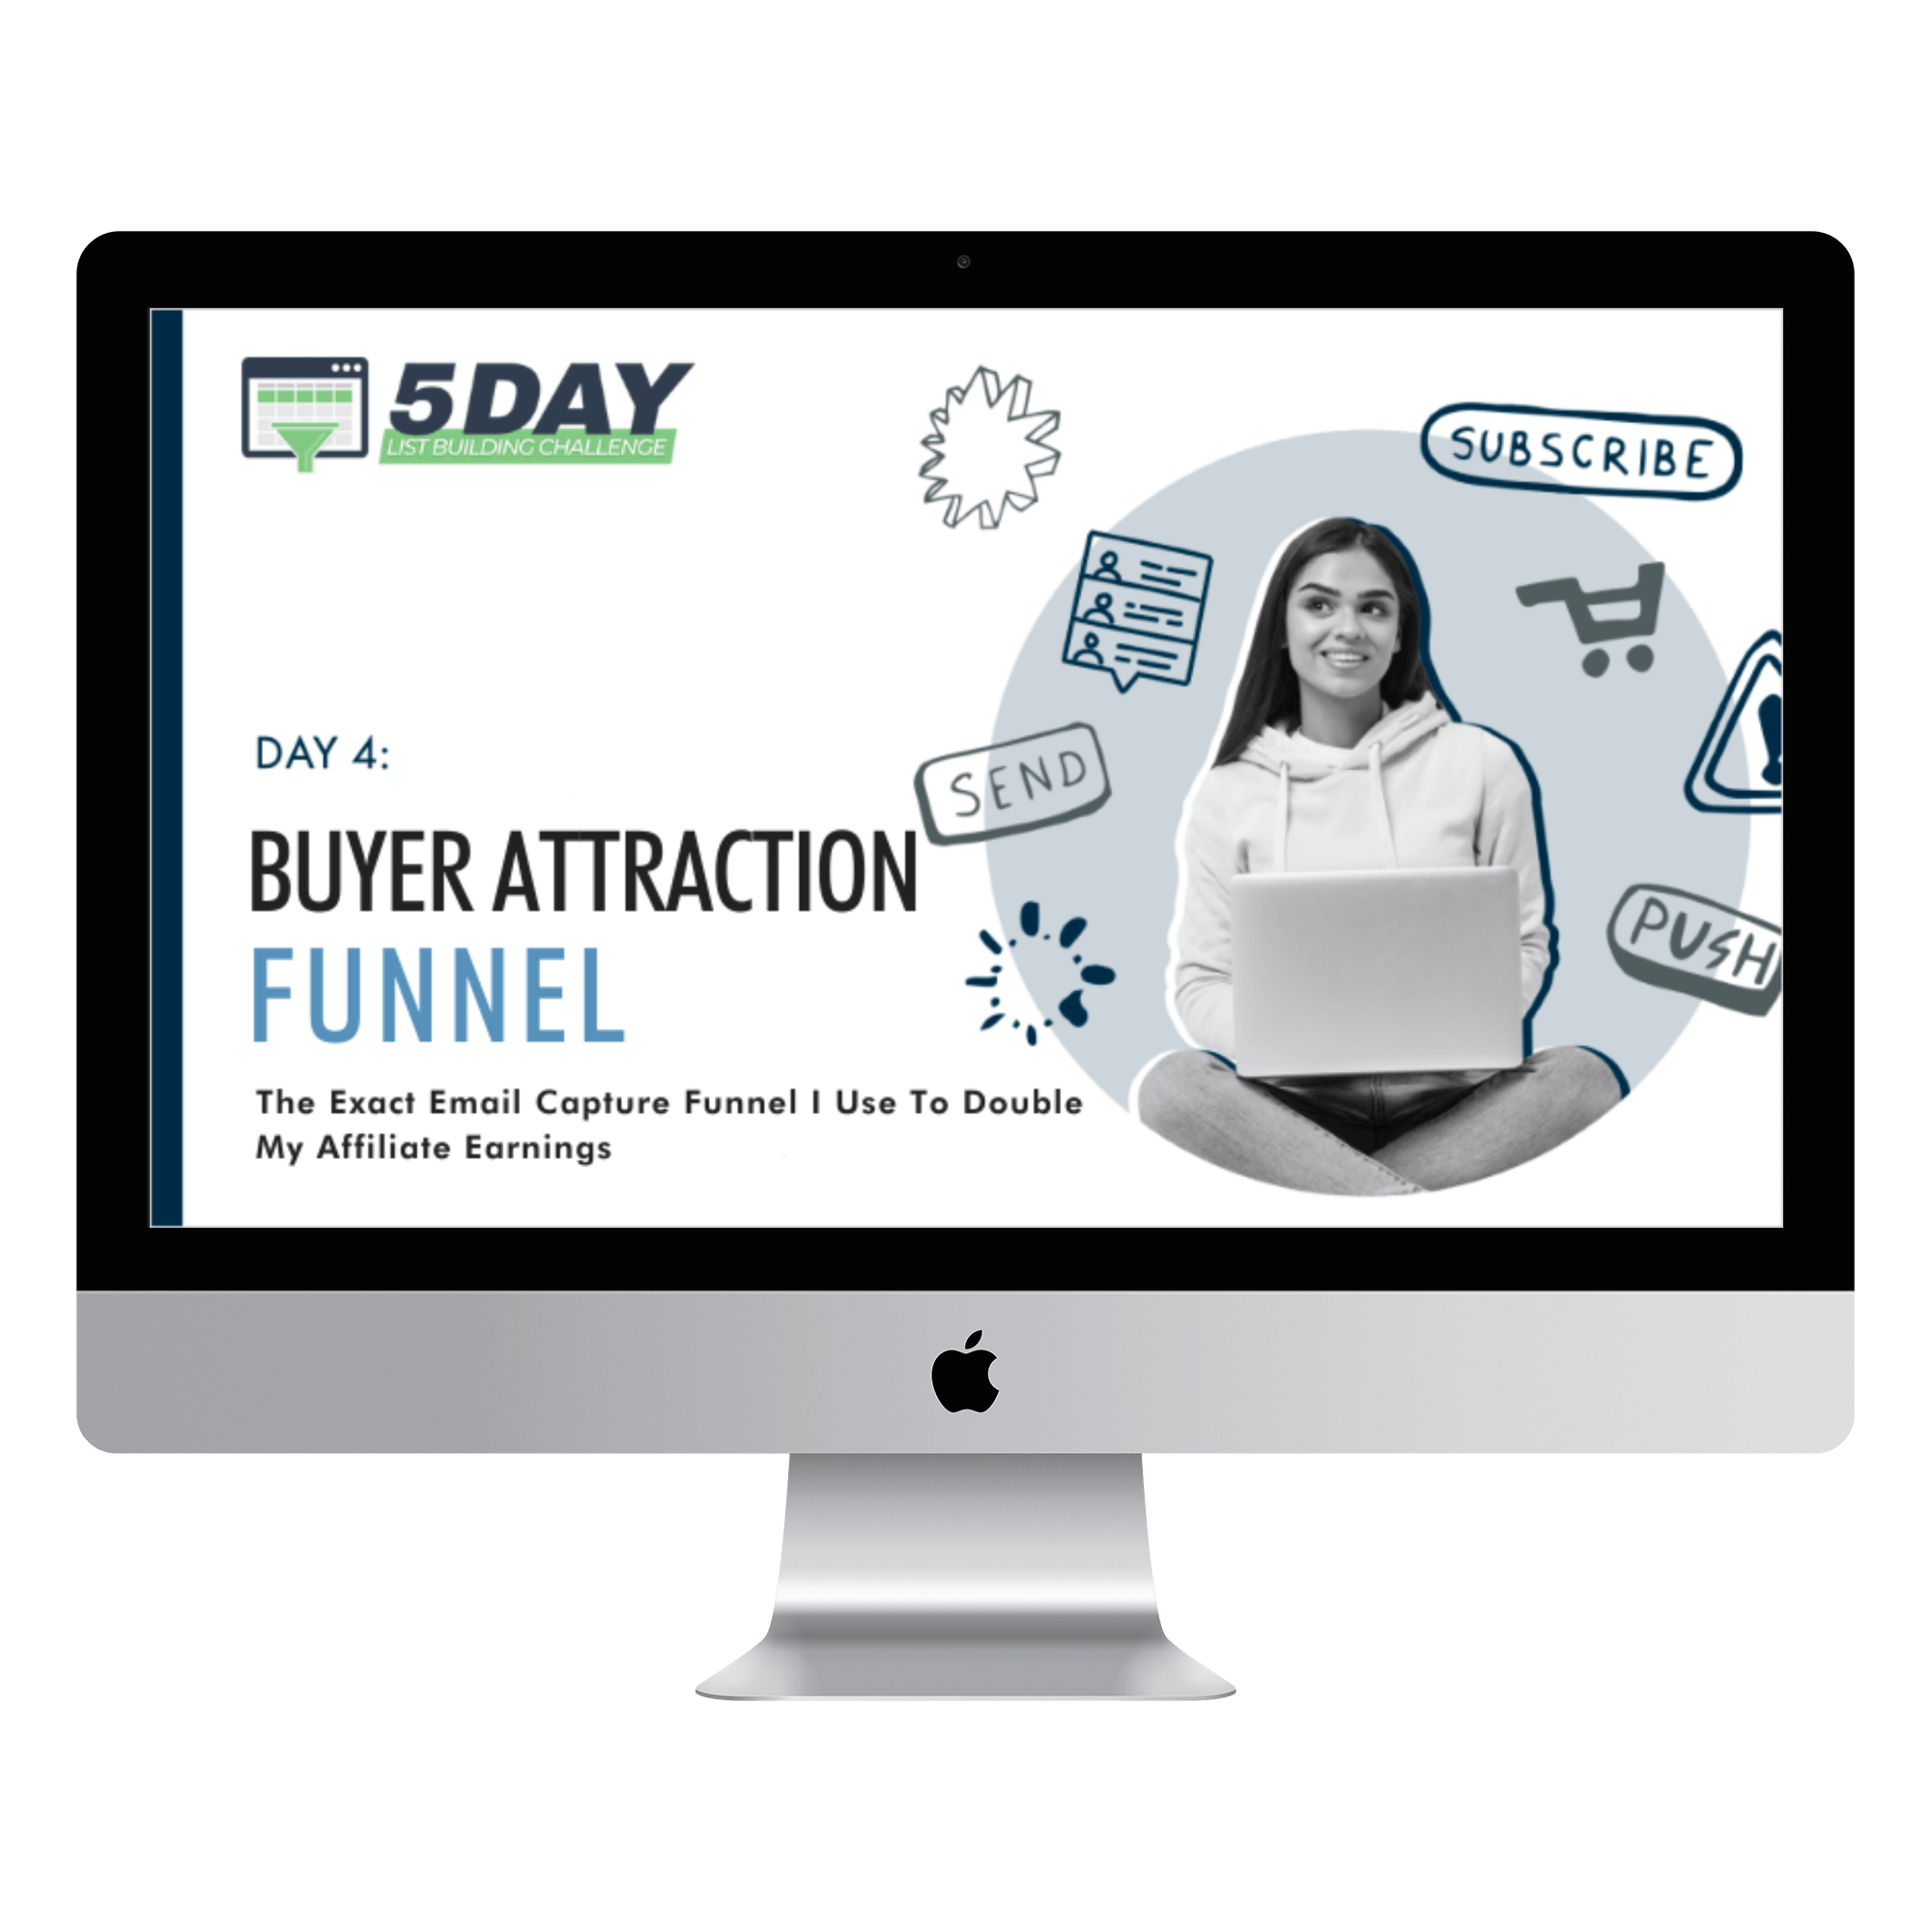 Day 4 - Buyer Attraction Funnel